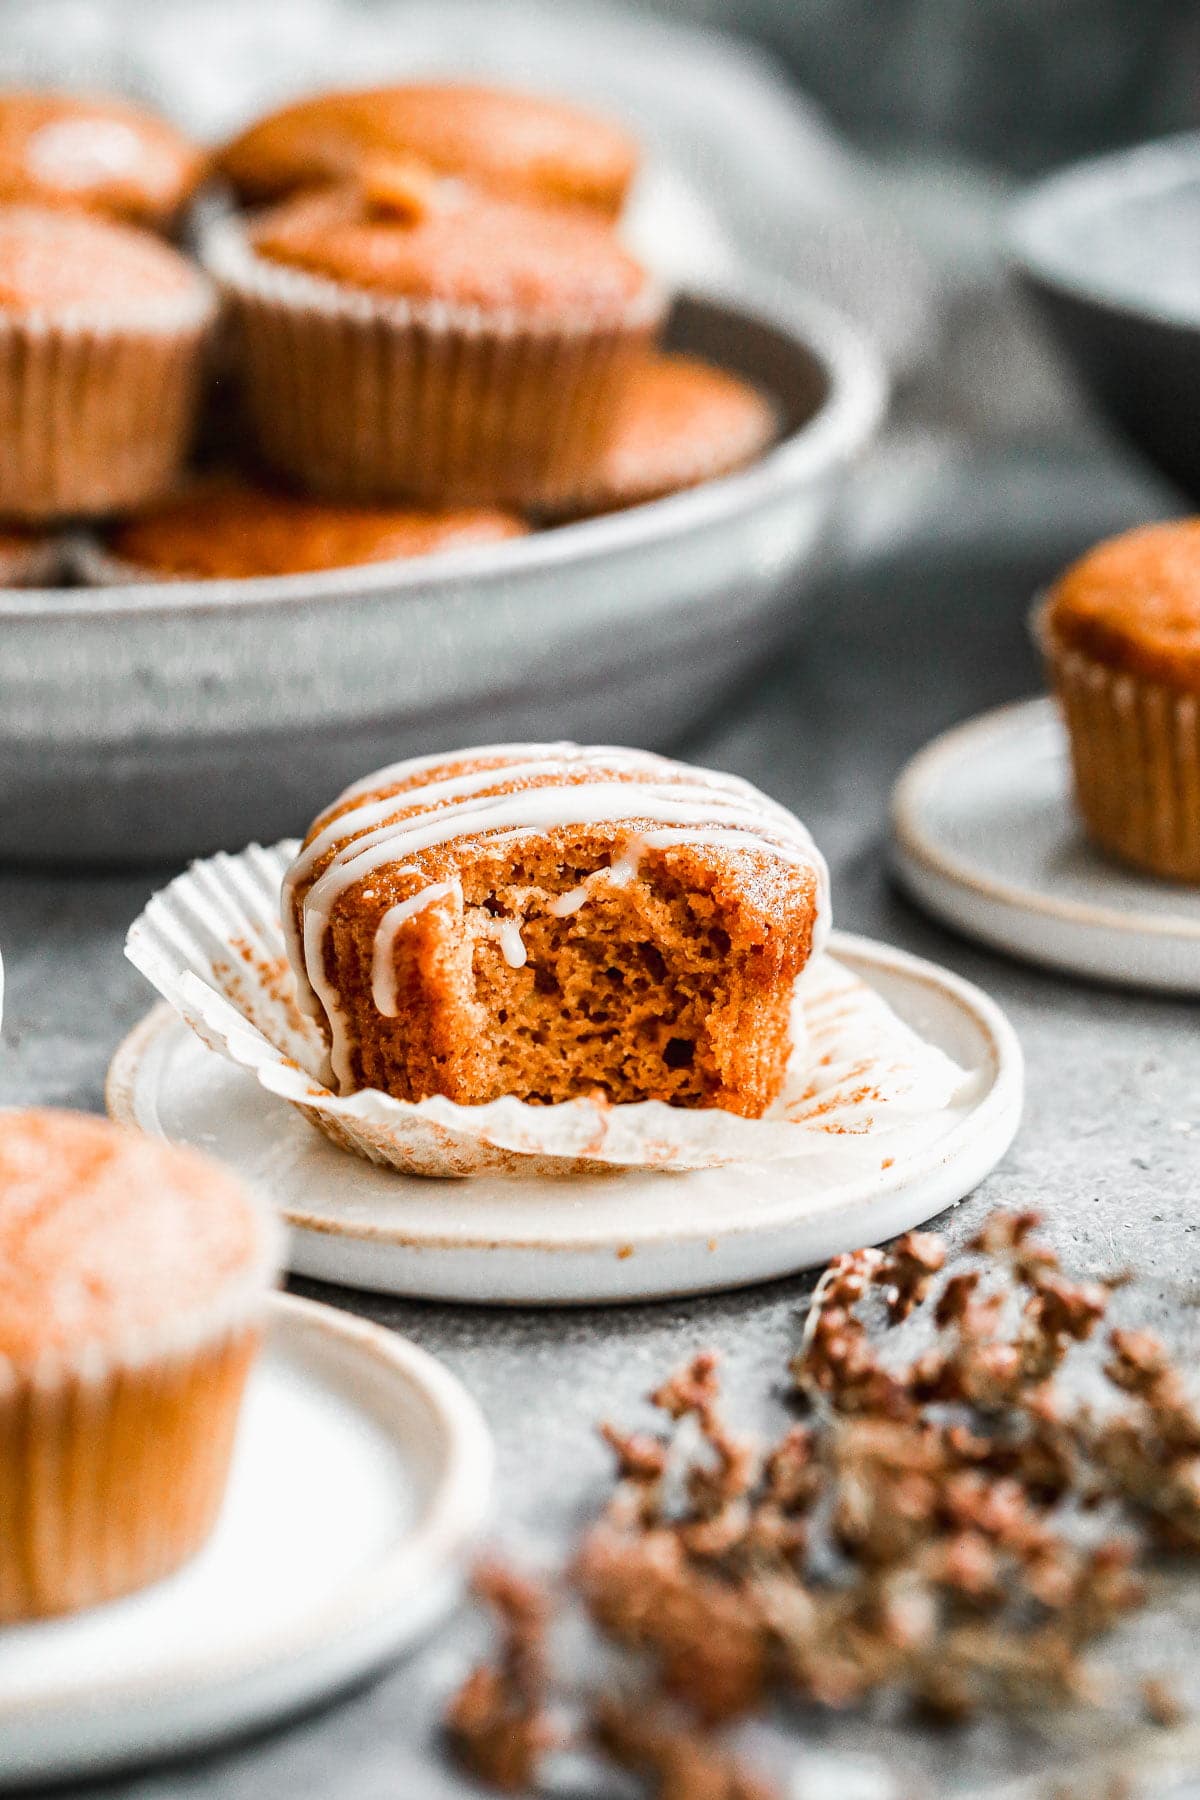 Our Easy Pumpkin Muffin Recipe is full of pumpkin flavor with notes of apple cider and the most tender, moist interior. Hands down the best pumpkin muffin recipe you'll make this fall! We drizzle the tops with a two-ingredient apple cider glaze but these are just as scrumptious plain. 